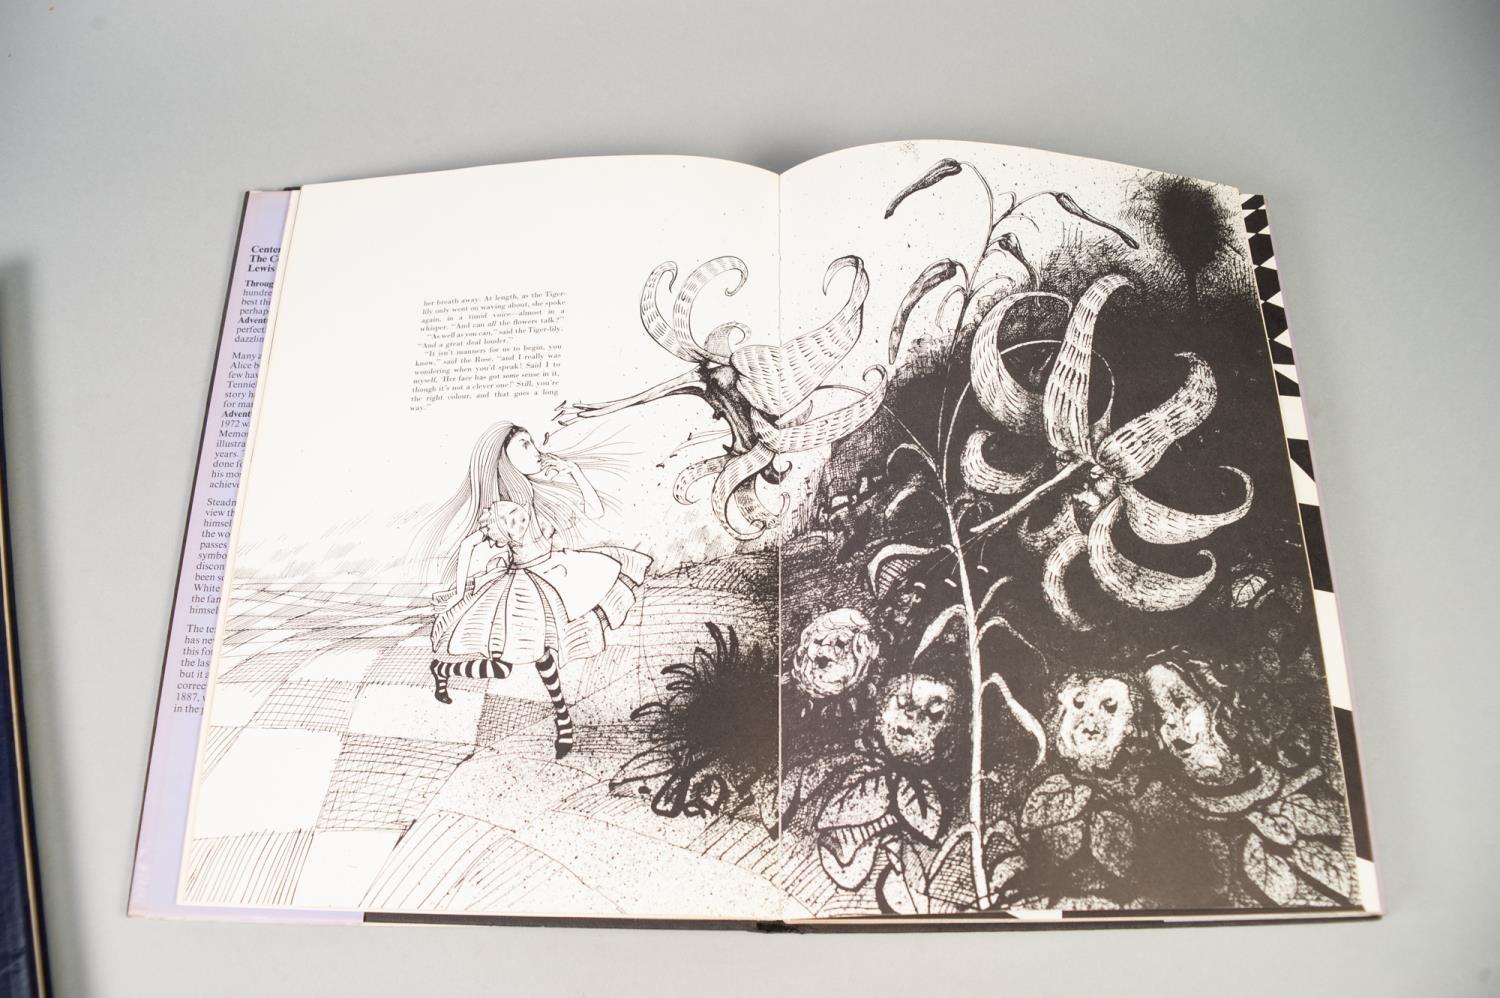 LEWIS CARROLL ALICE IN WONDERLAND, illustrated by Ralph Steadman, published Dennis Dobson, London - Image 5 of 8